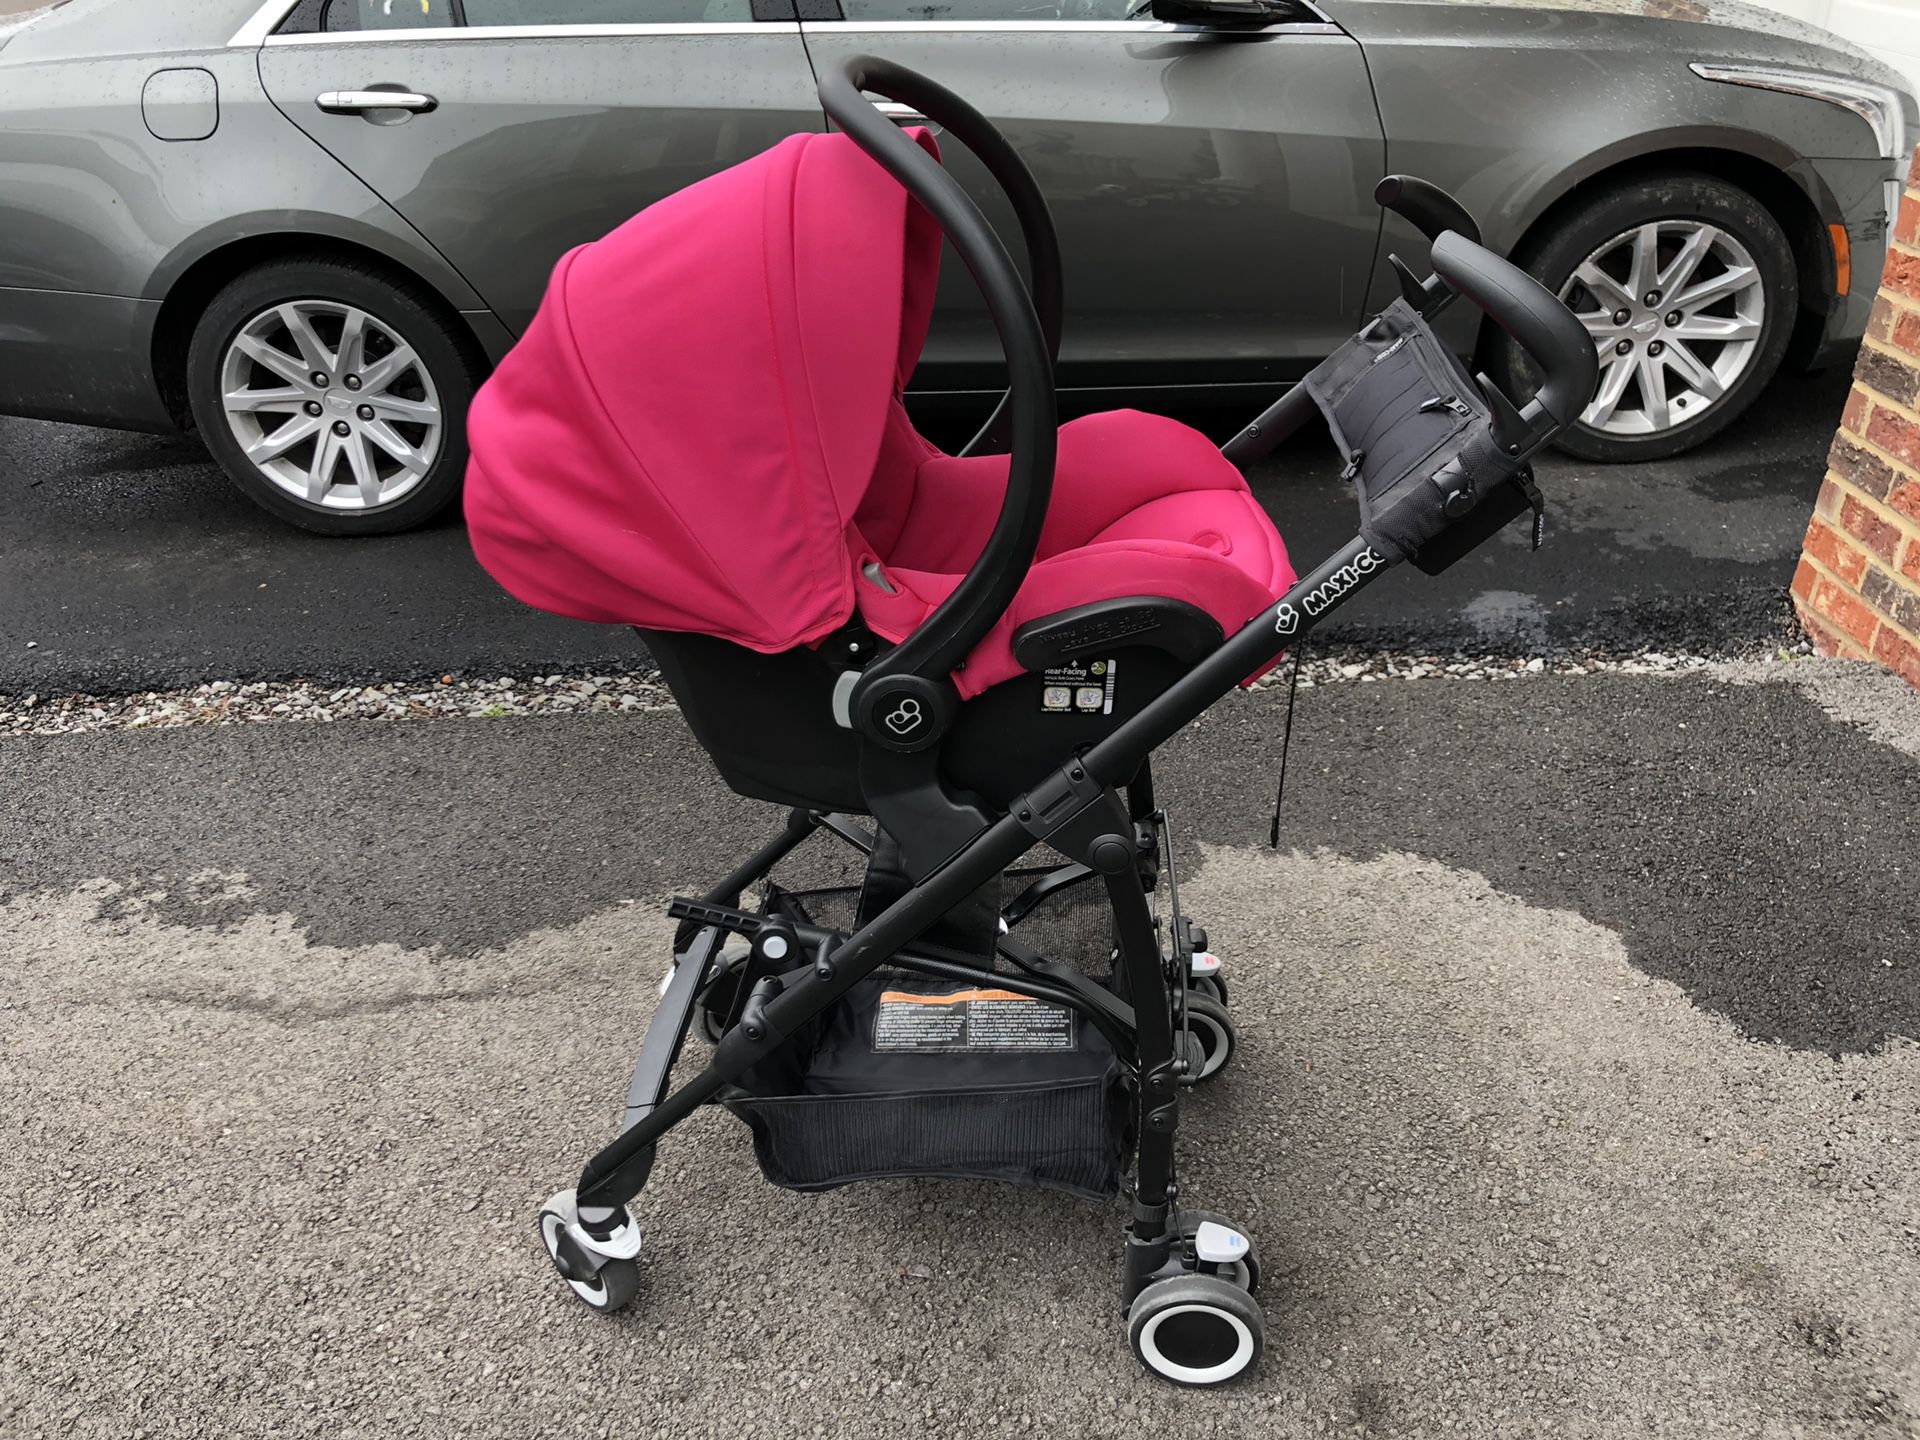 Maxi-Cosi Mico AP Infant Car seat Rose Pink With Black Base & Maxi-Taxi Stroller